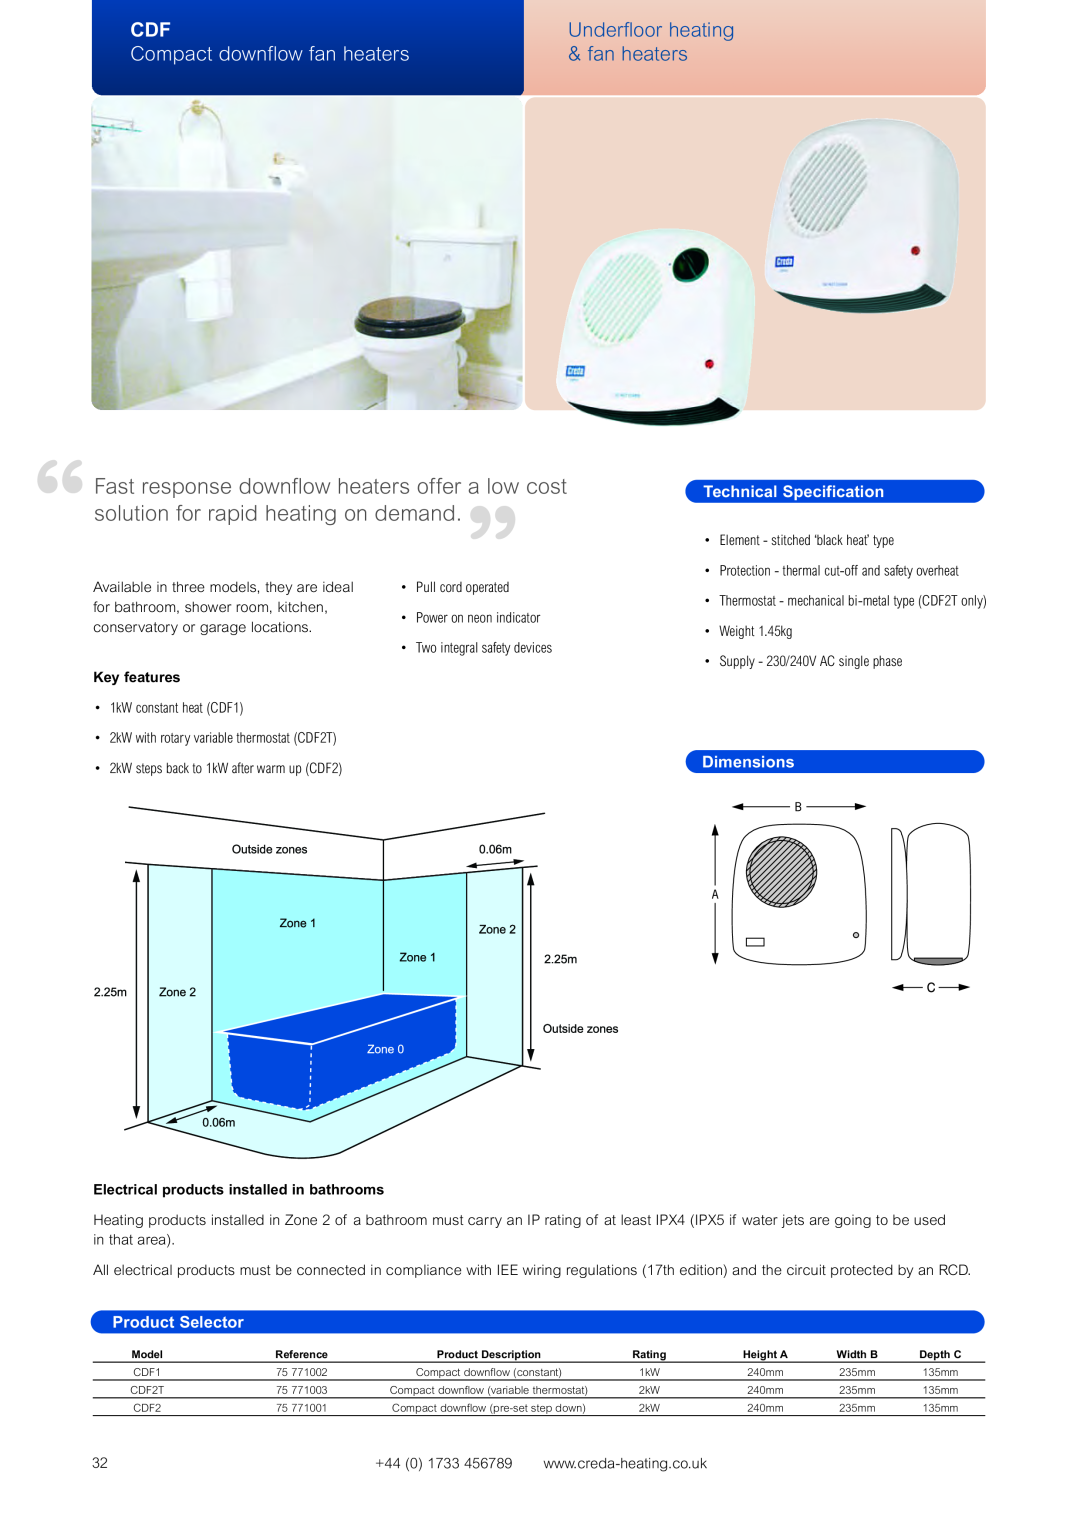 Creda Heating Solution Fast response downflow heaters offer a low cost, “solution for rapid heating on demand, Dimensions 